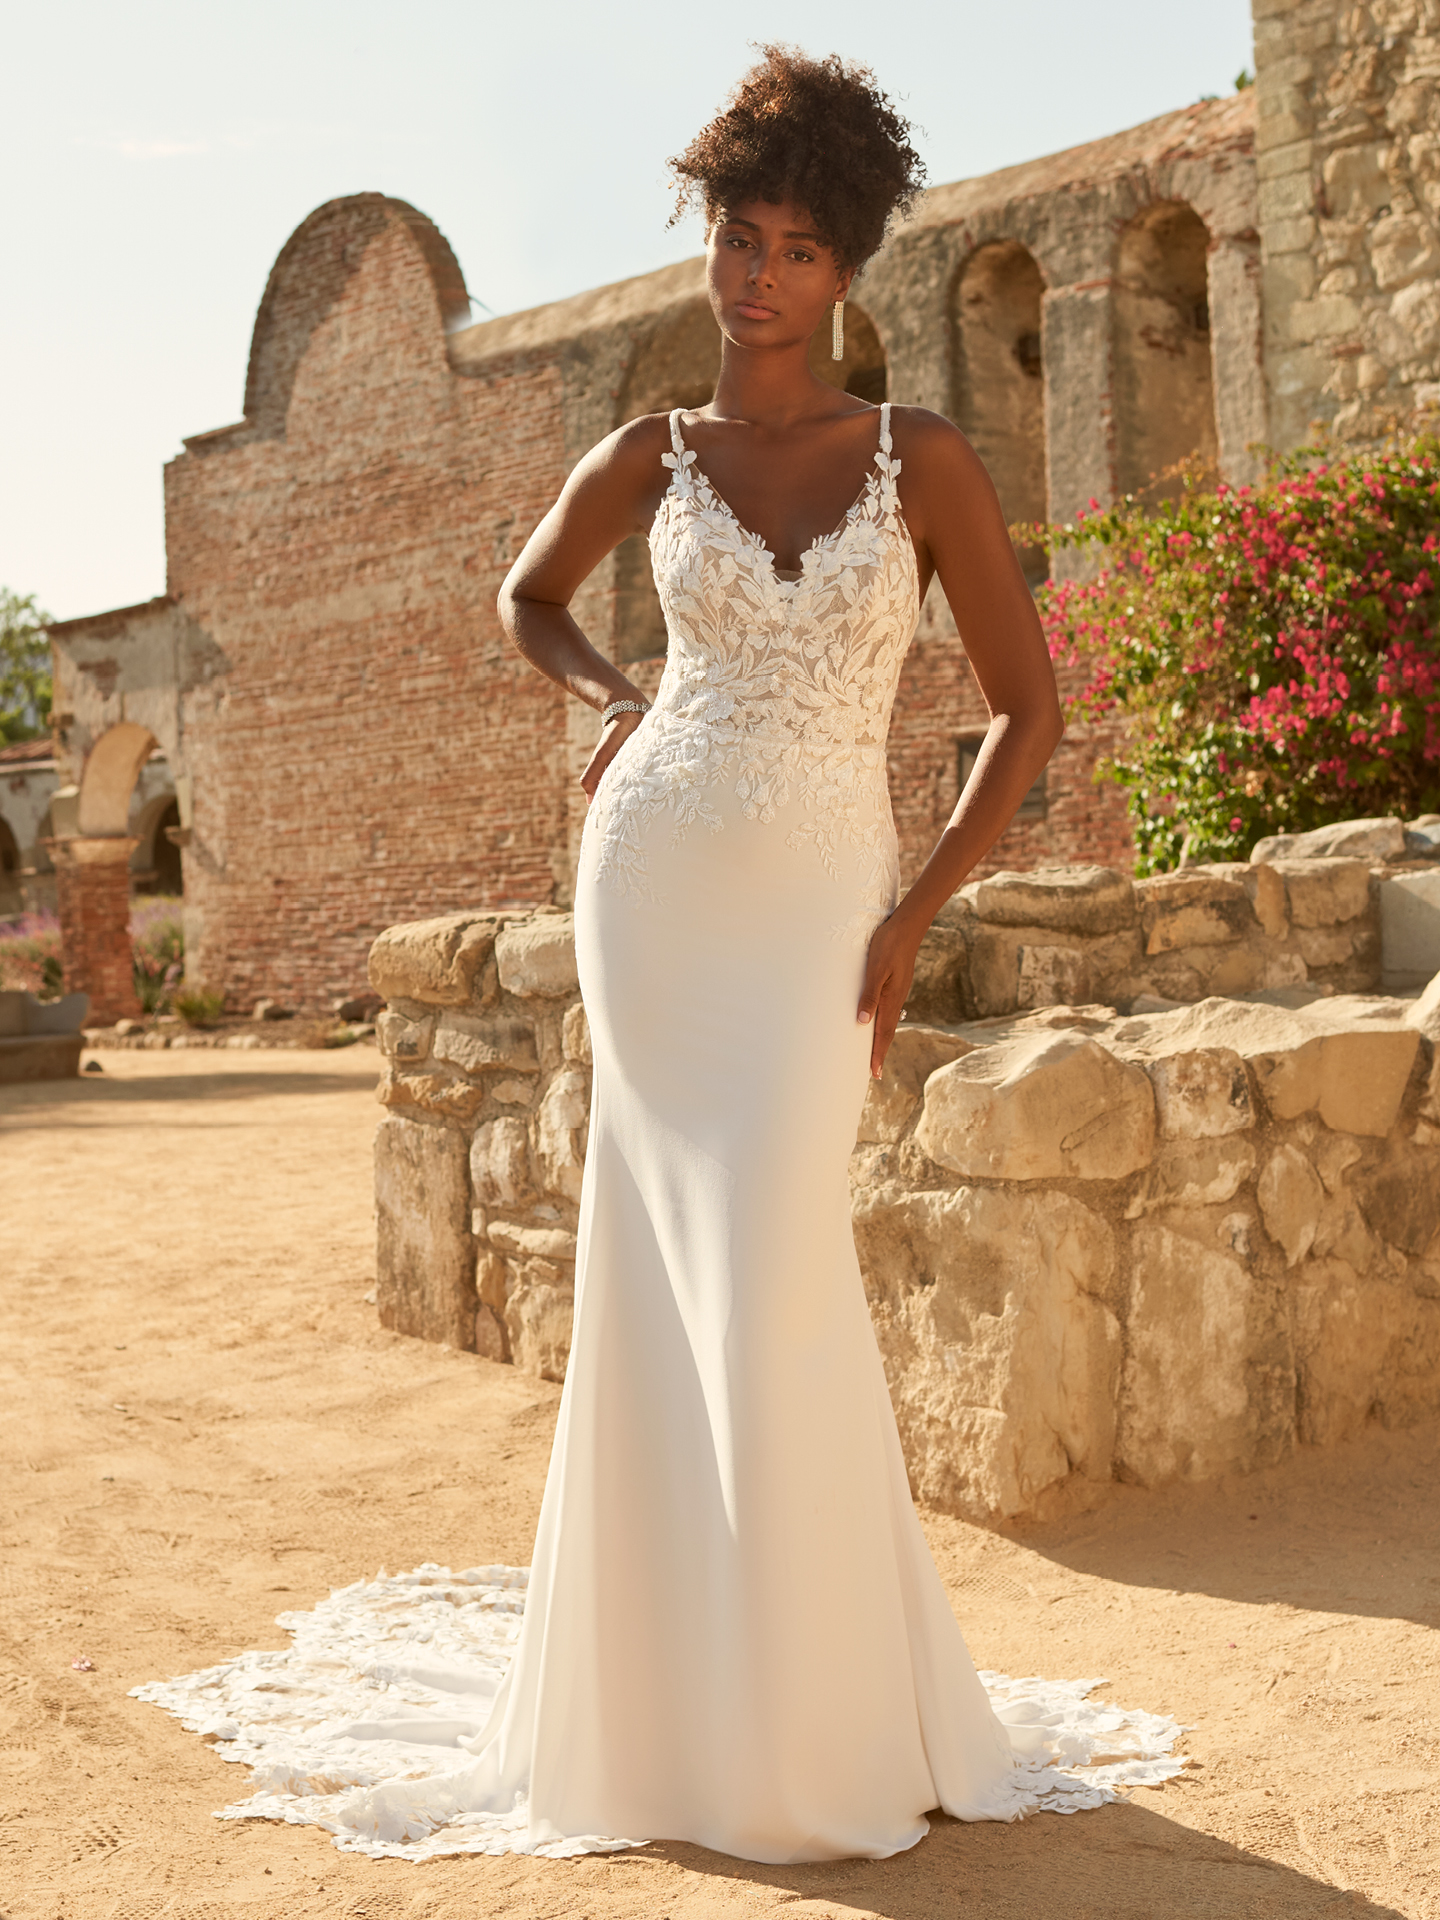 Bride Wearing A Sheath Crepe Dress Called Baxley By Maggie Sottero